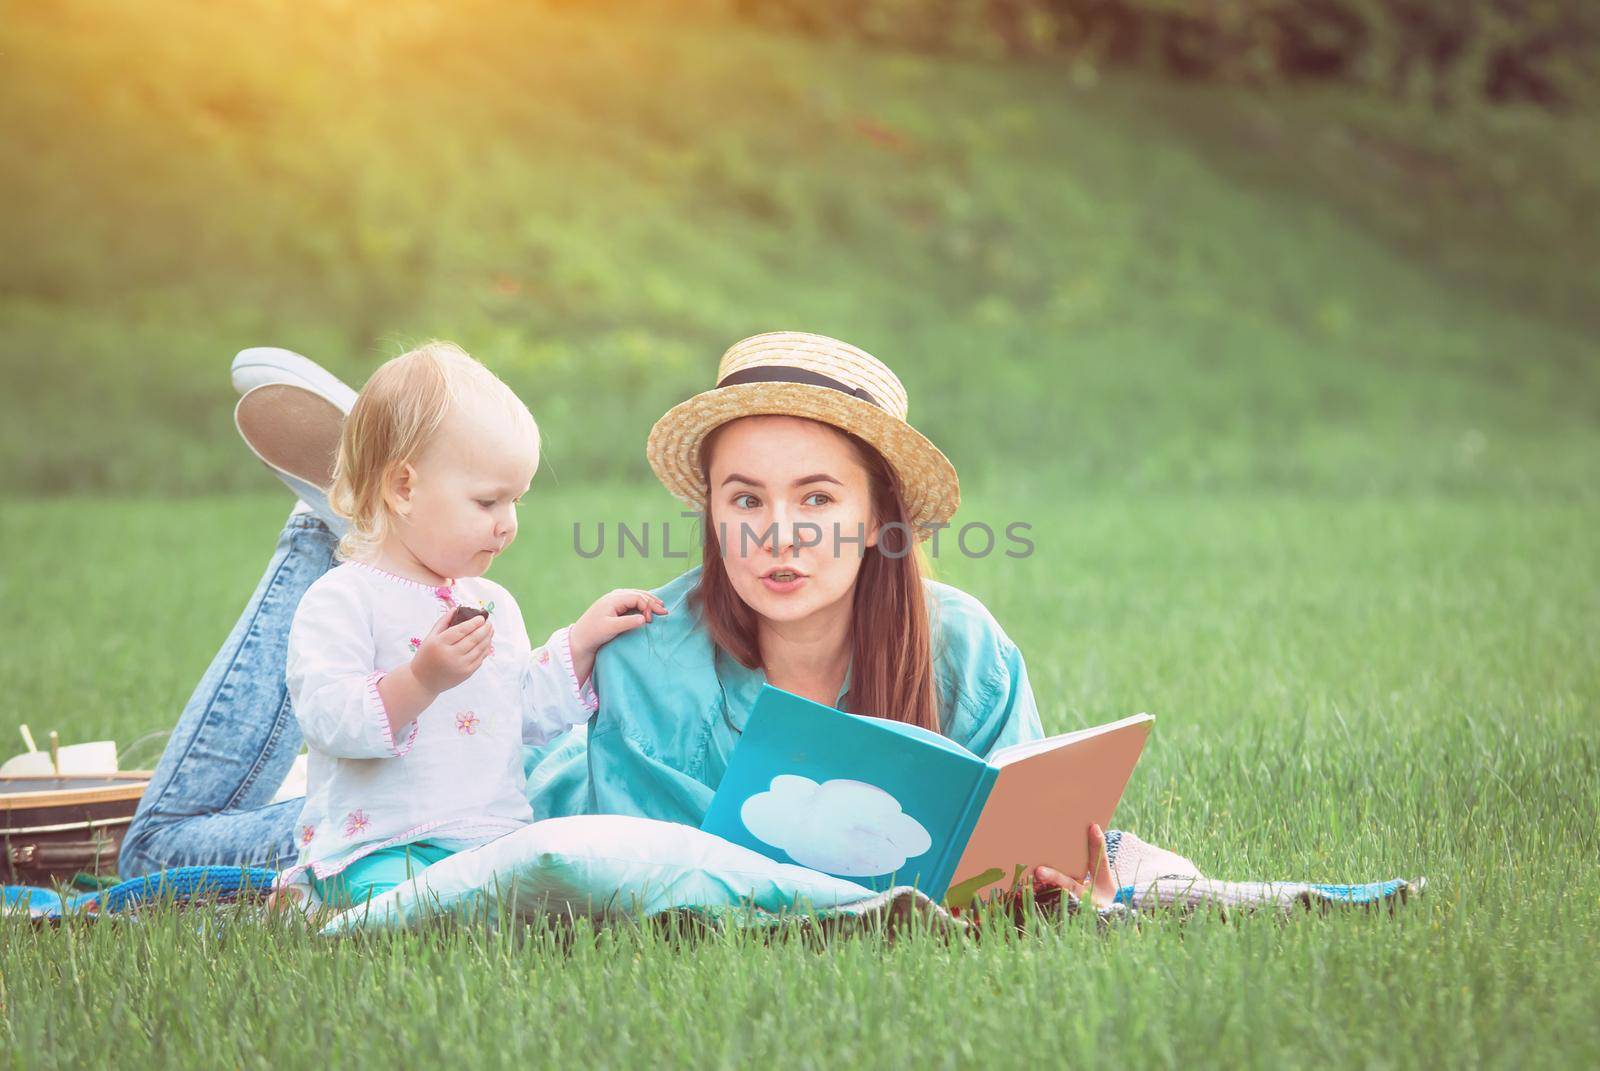 Mother is reading book for baby girl lying on the grass in the park by maramorosz